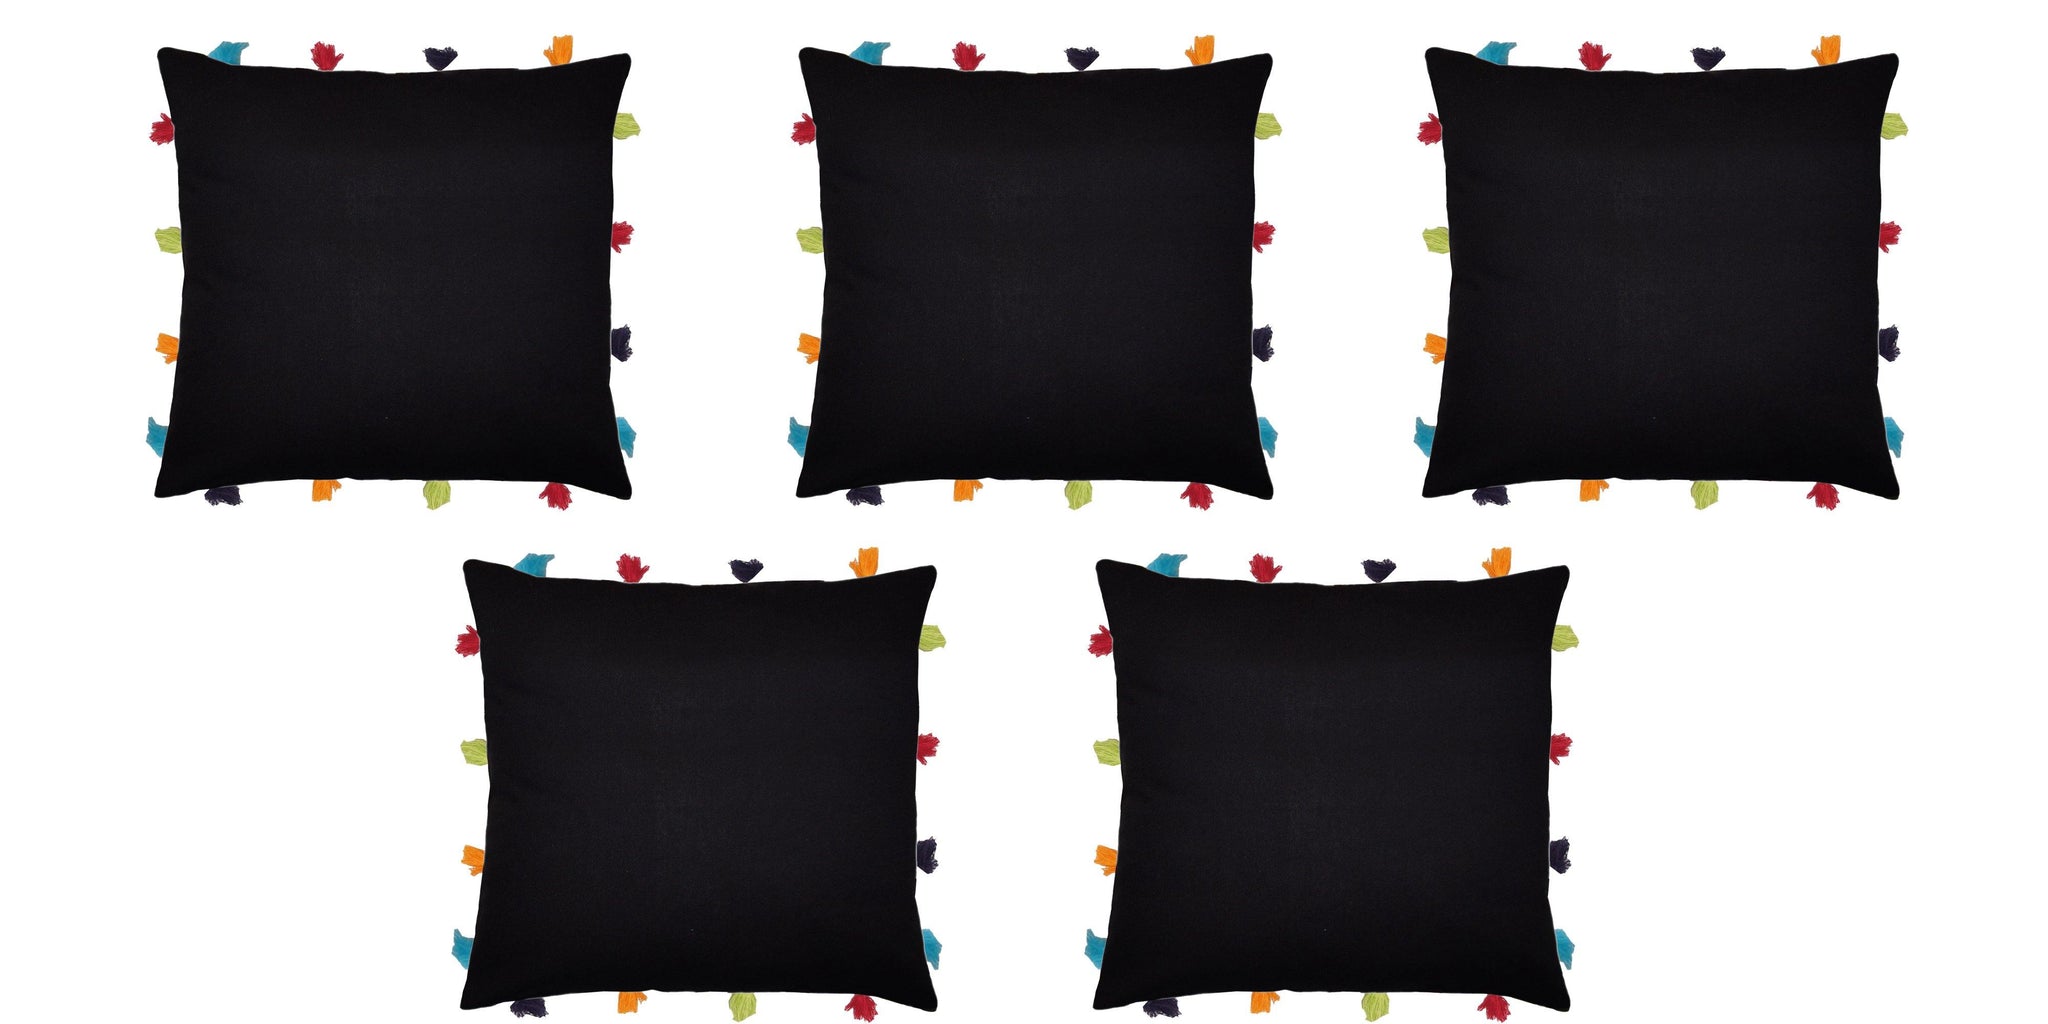 Lushomes Pirate Black Cushion Cover with Colorful tassels (5 pcs, 14 x 14”) - Lushomes